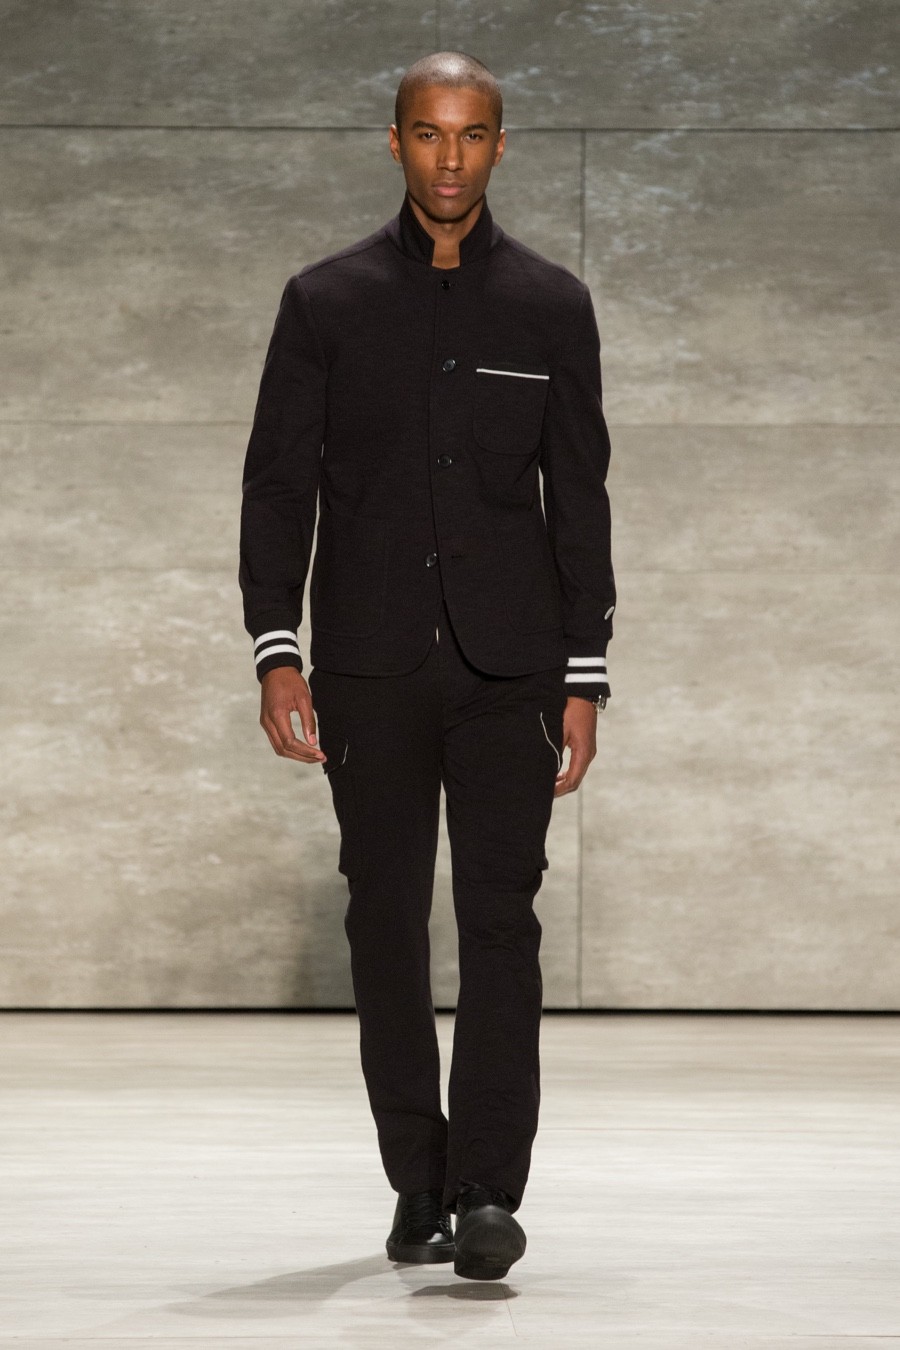 Todd Snyder Fall Winter 2015 Menswear Collection 007